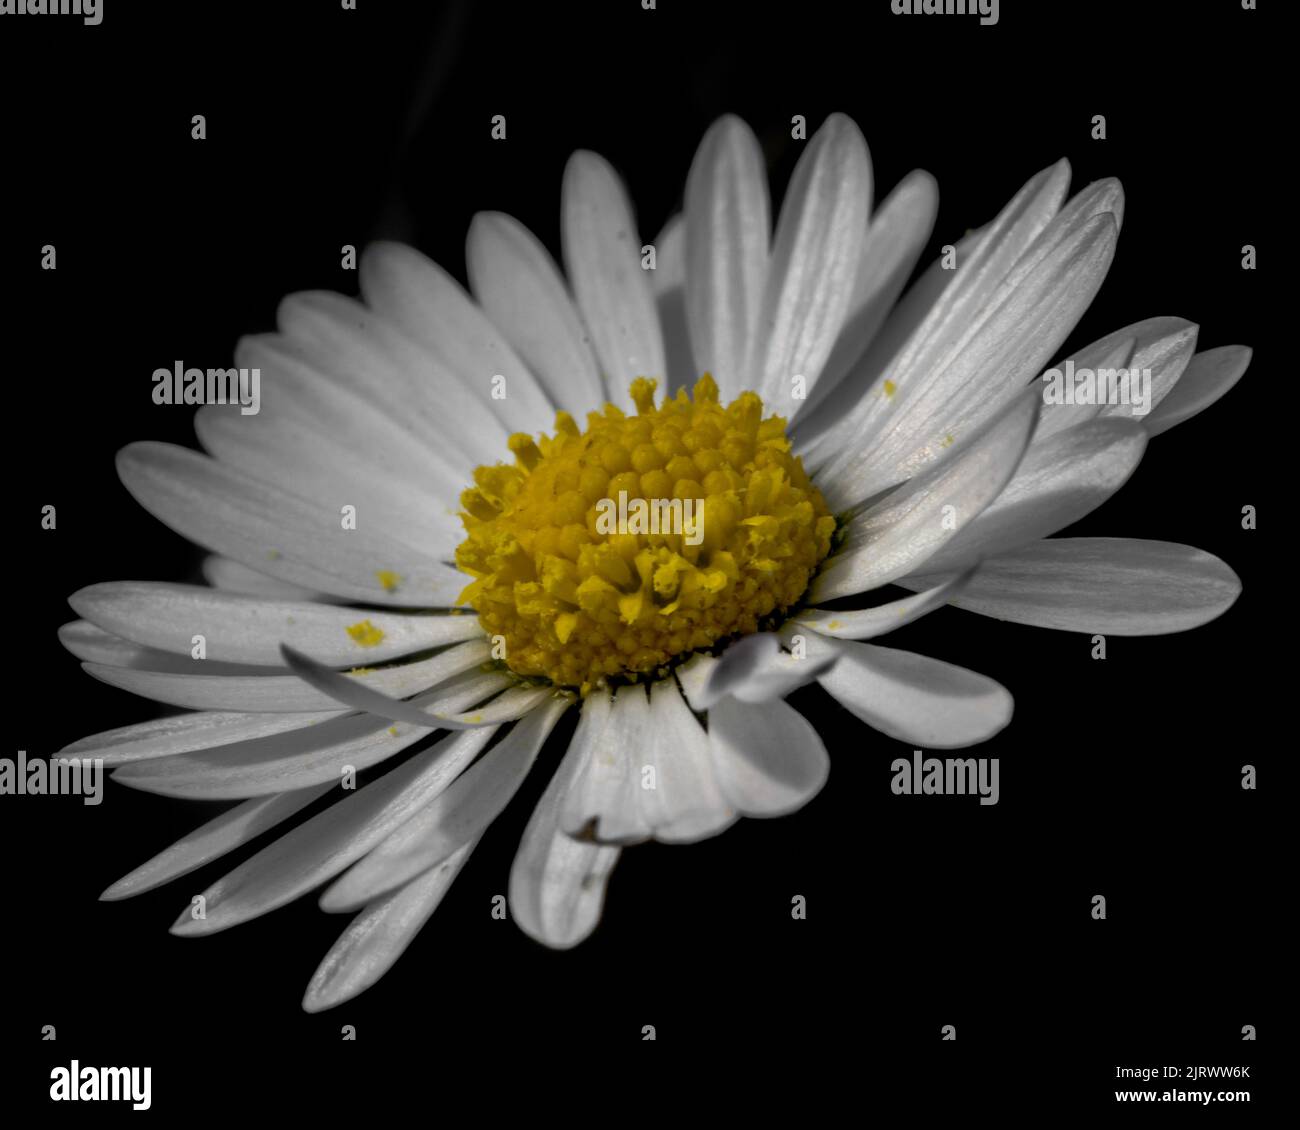 Common daisy (Bellis perennis) flower close-up with white petals and yellow pistil on black background Stock Photo